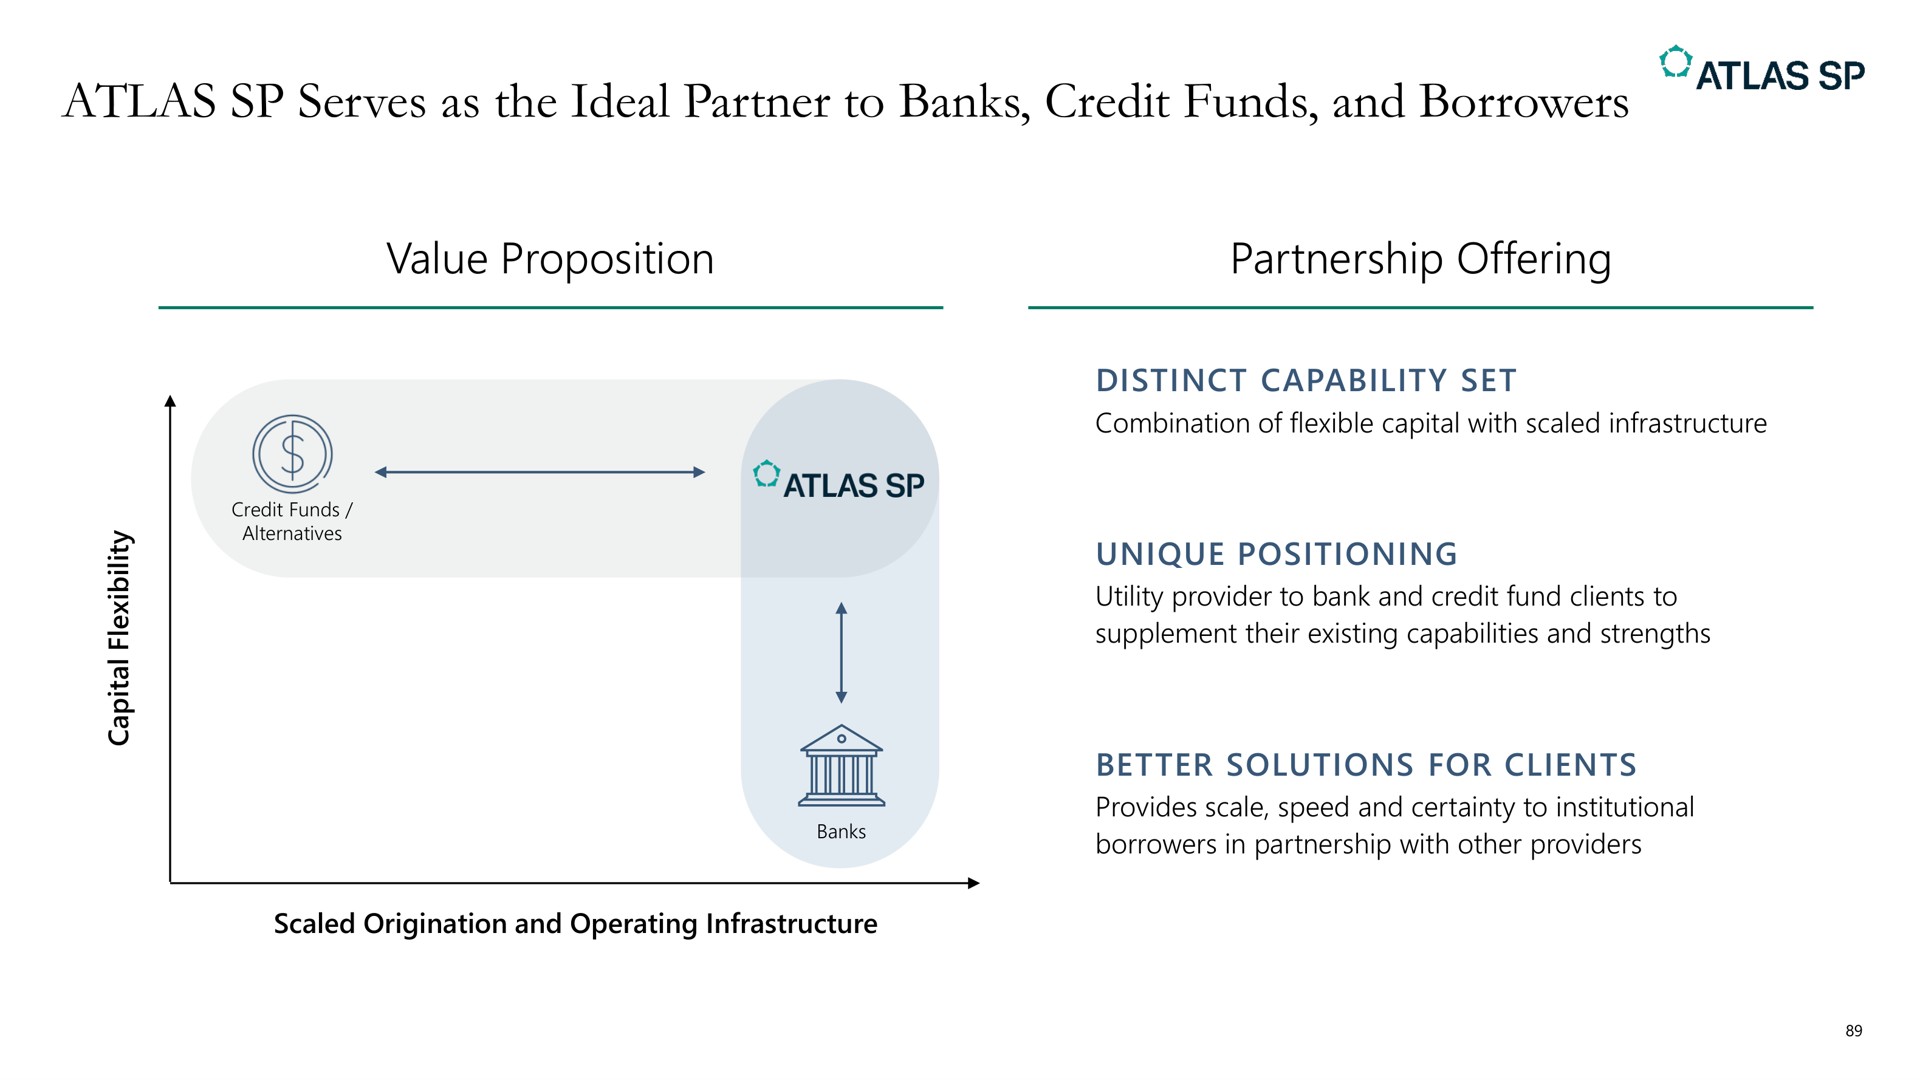 atlas serves as the ideal partner to banks credit funds and borrowers | Apollo Global Management